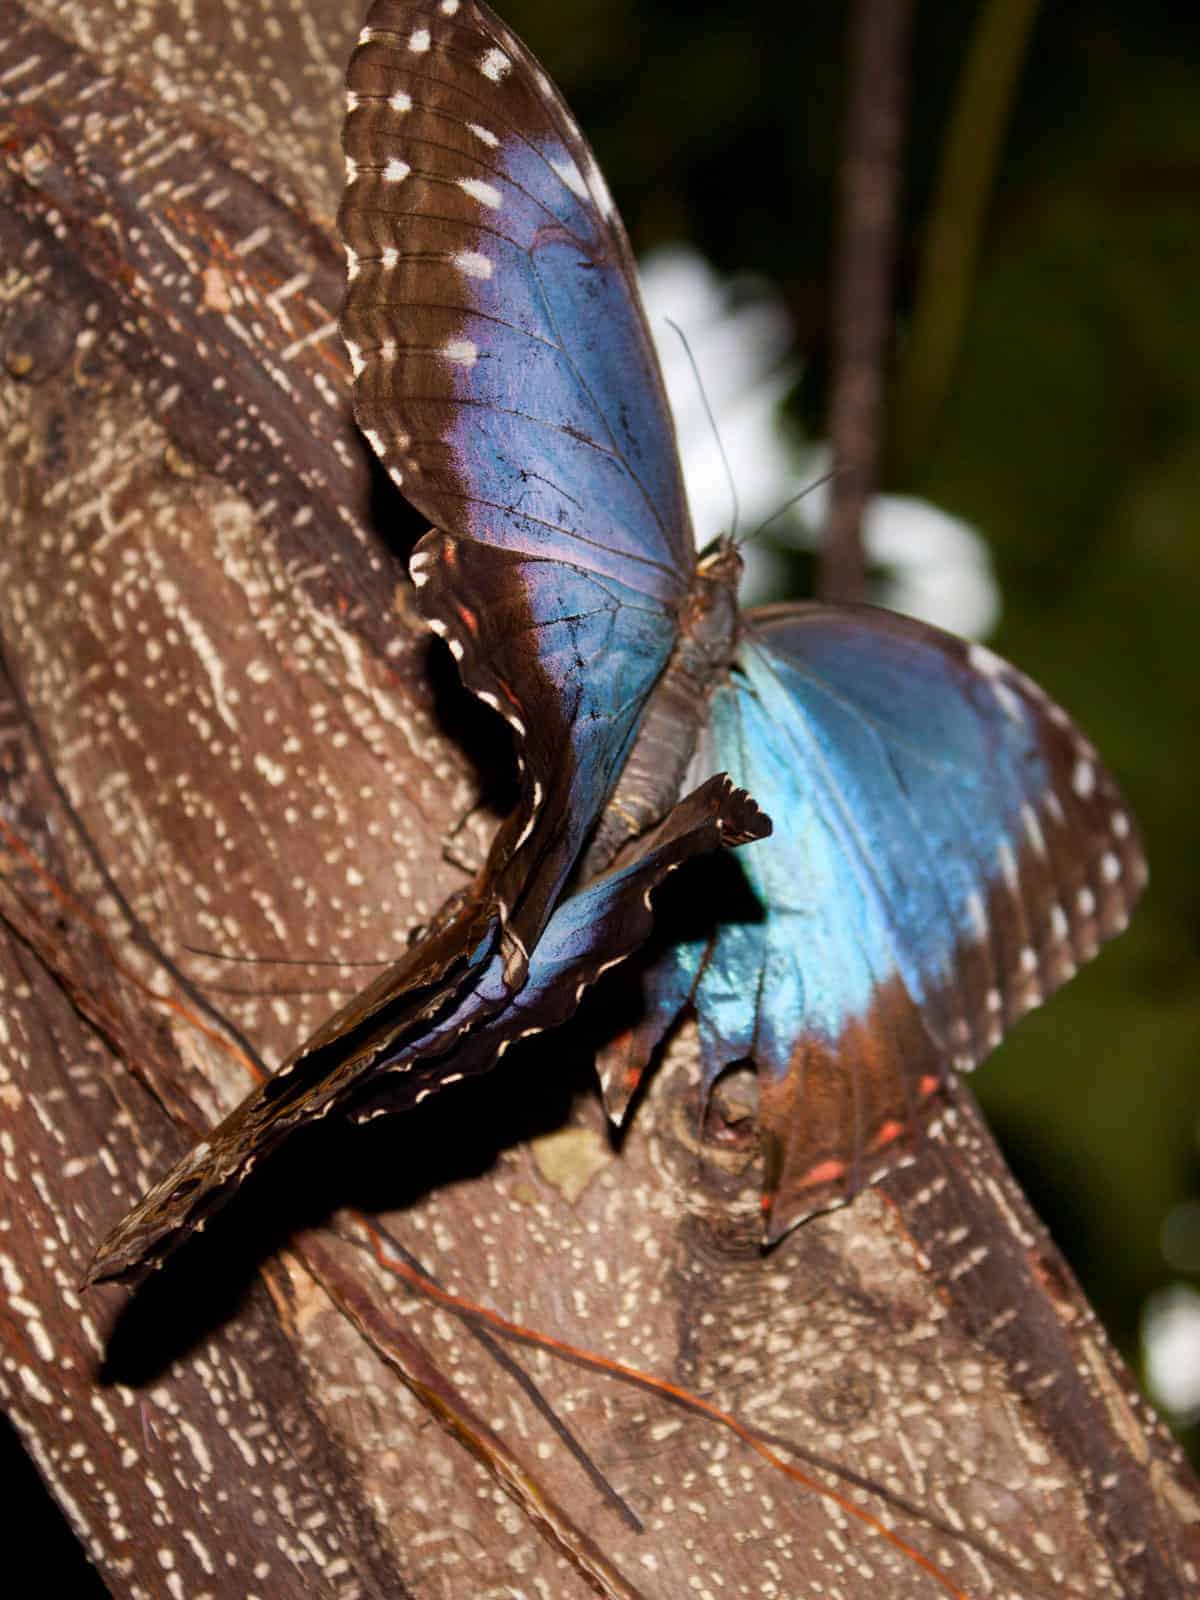 Blue morpho butterfly mating